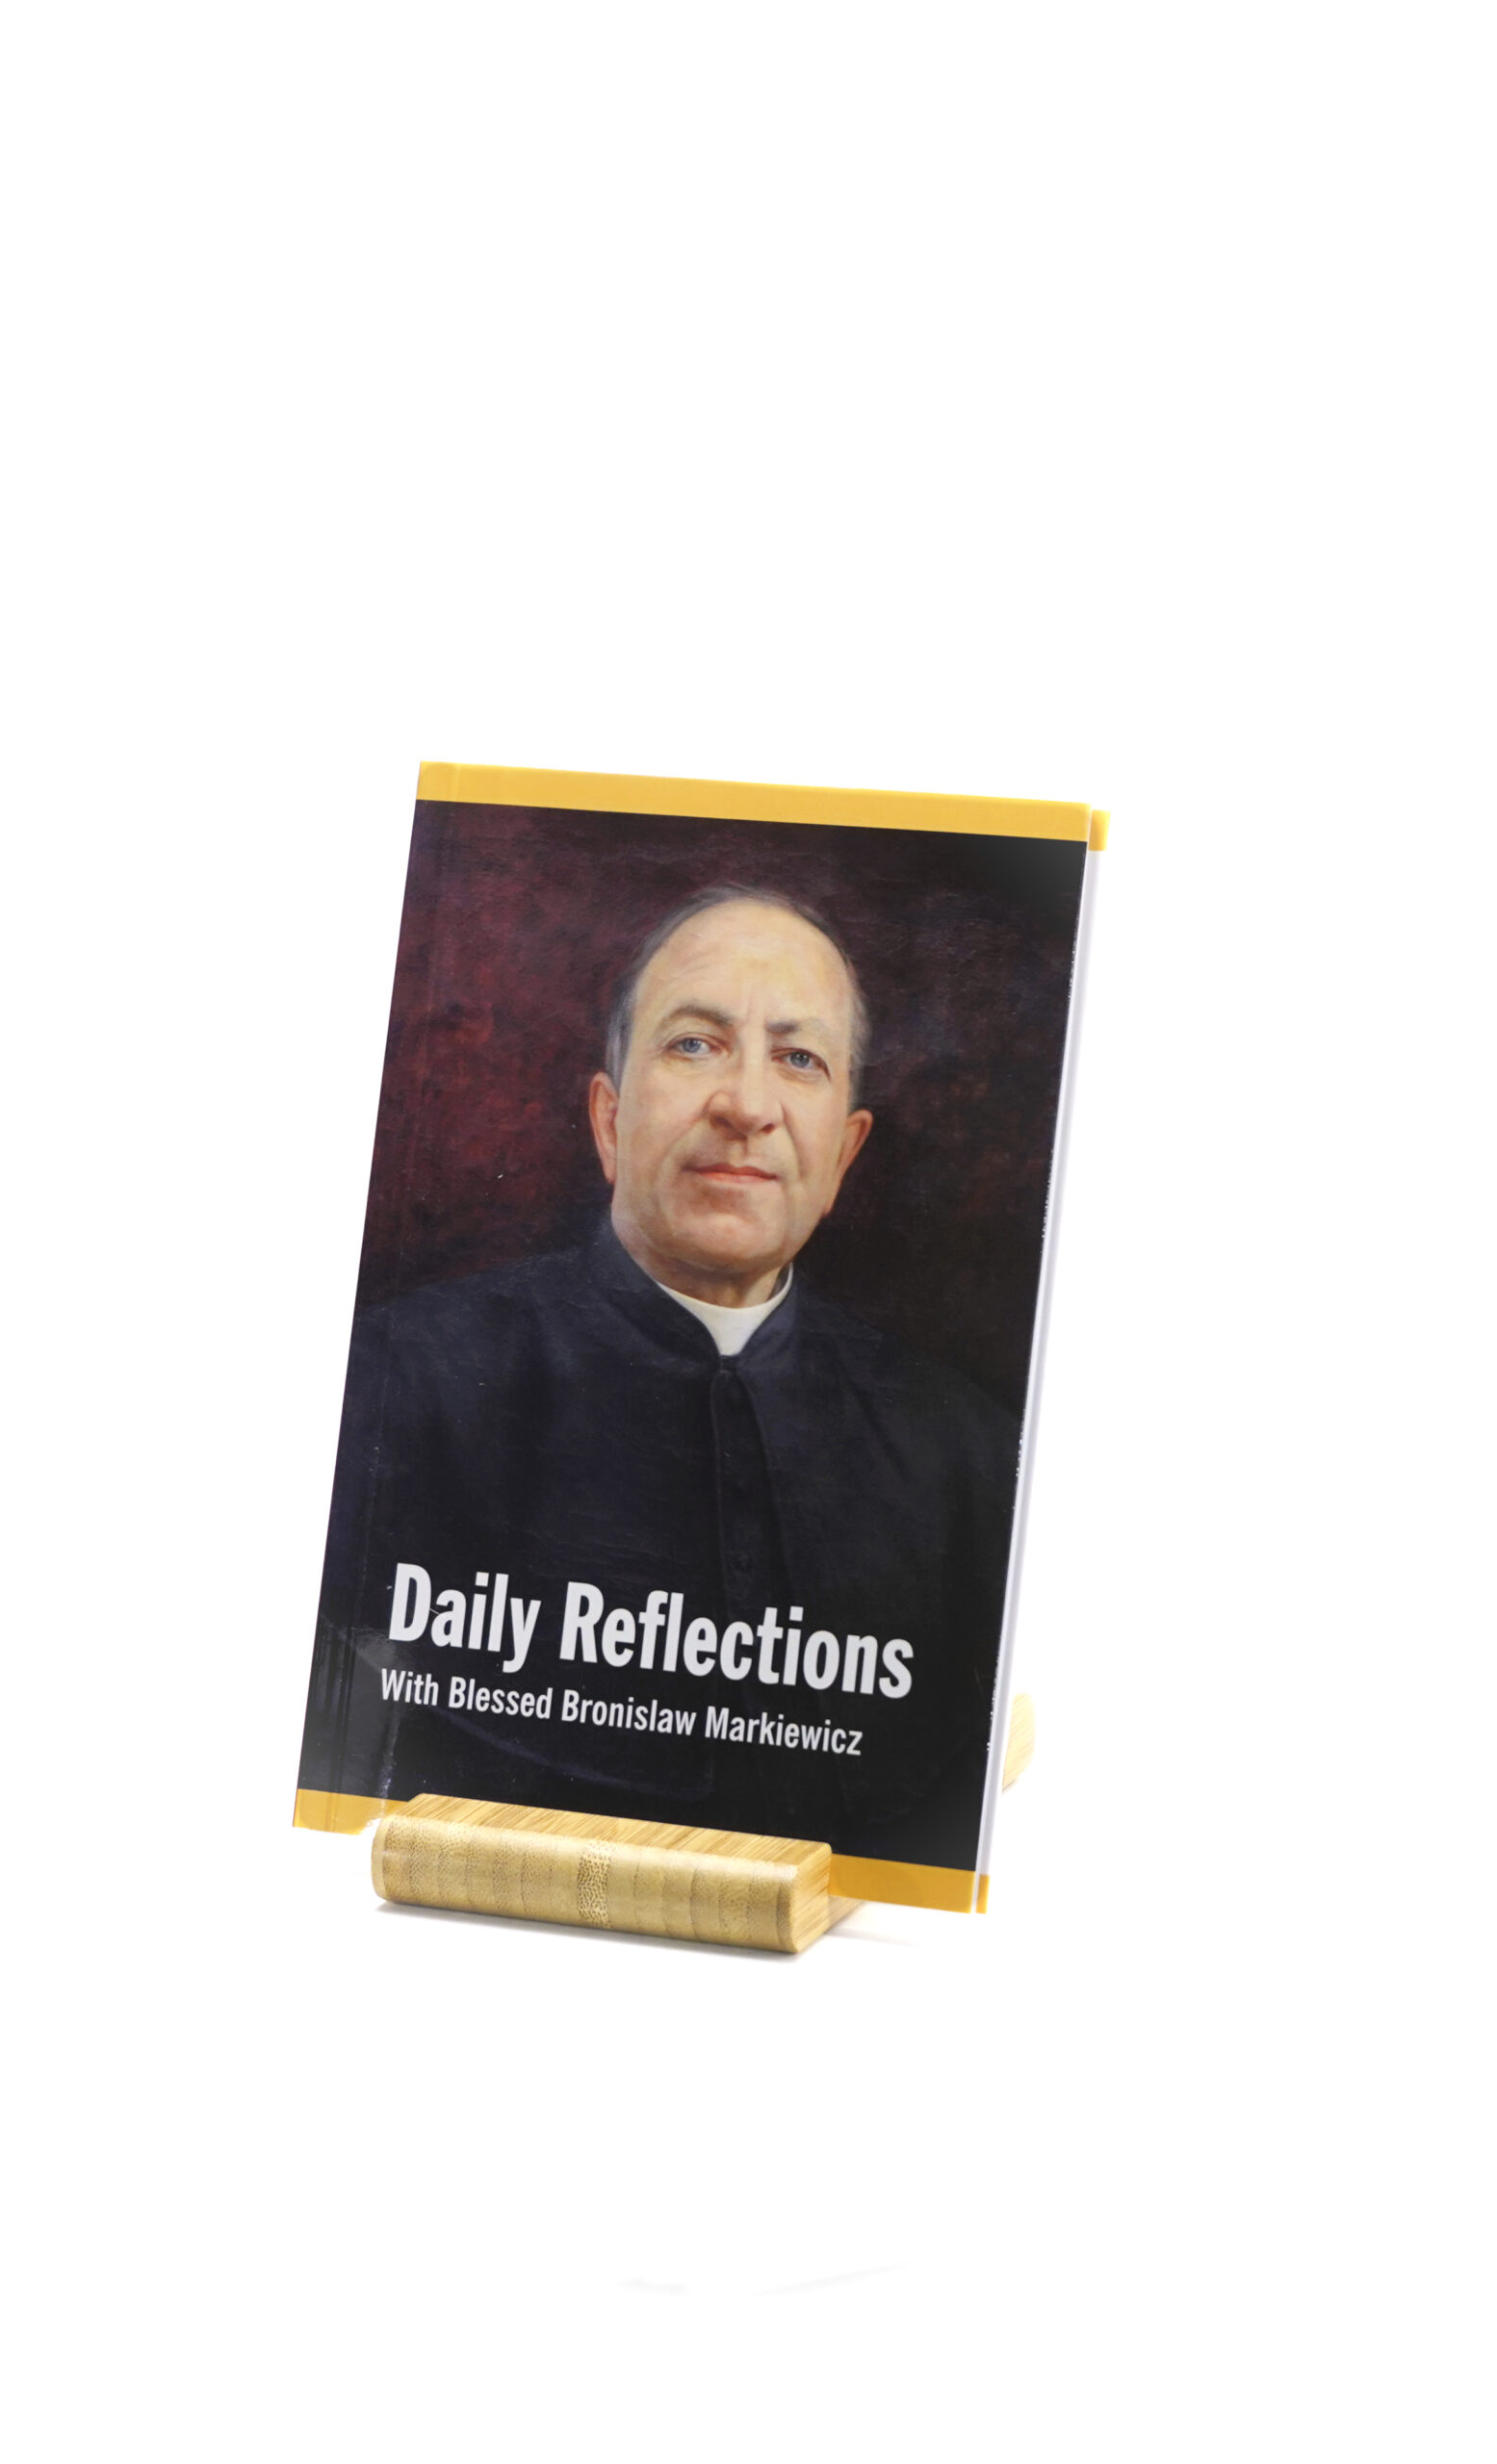 Daily Reflections with Blessed Bronislaw Markiewicz